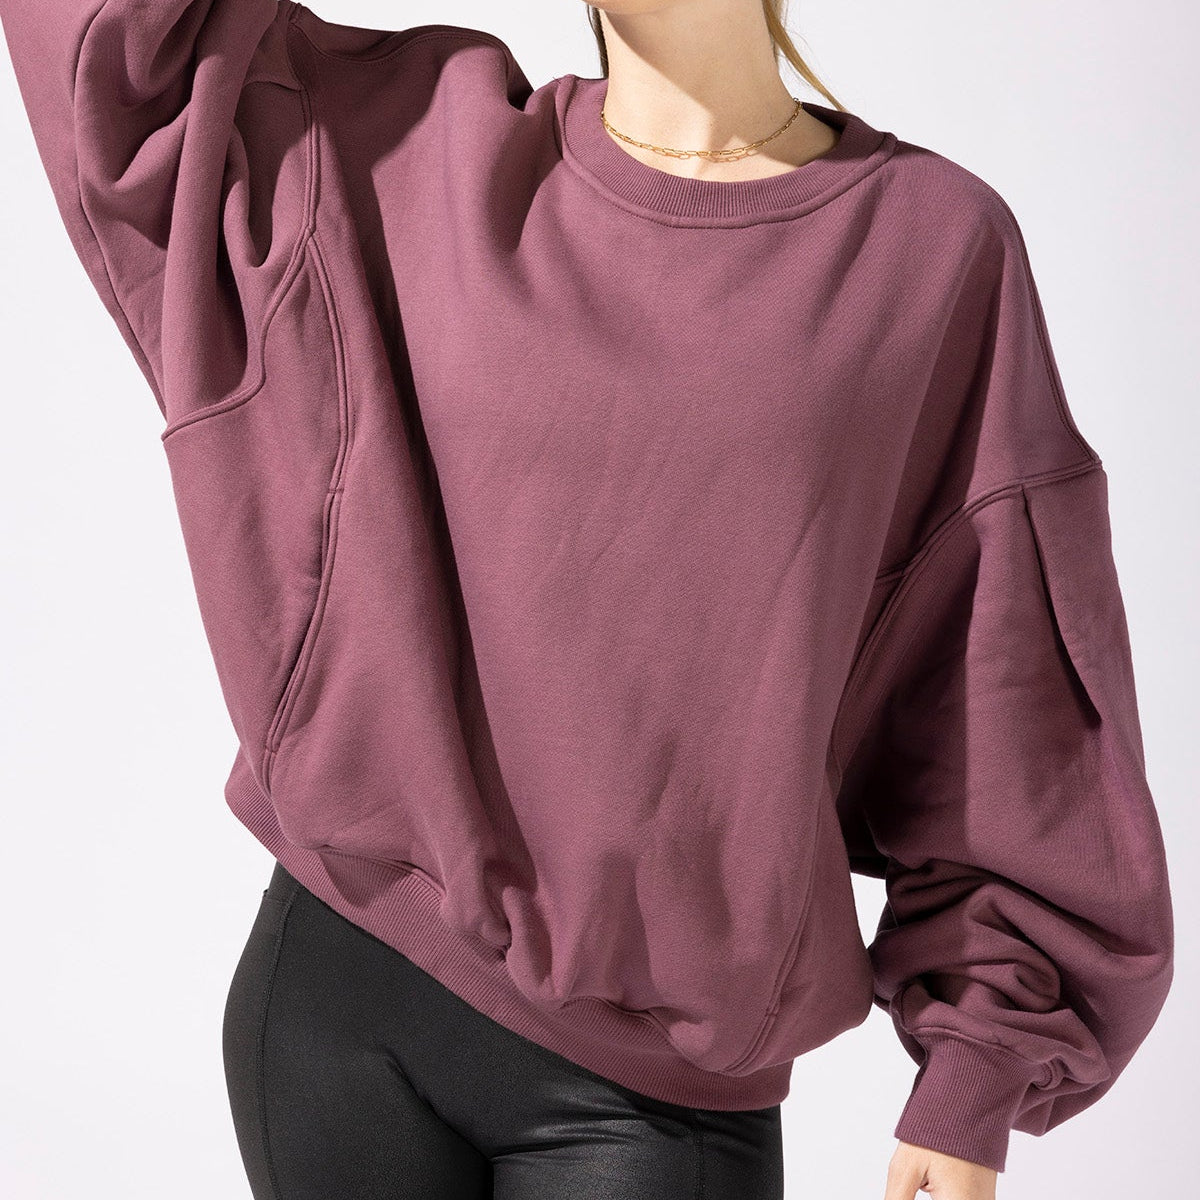 The Brunch Oversized Sweater For Women, Loose Comfortable Fit With Pockets - Merlot S/M